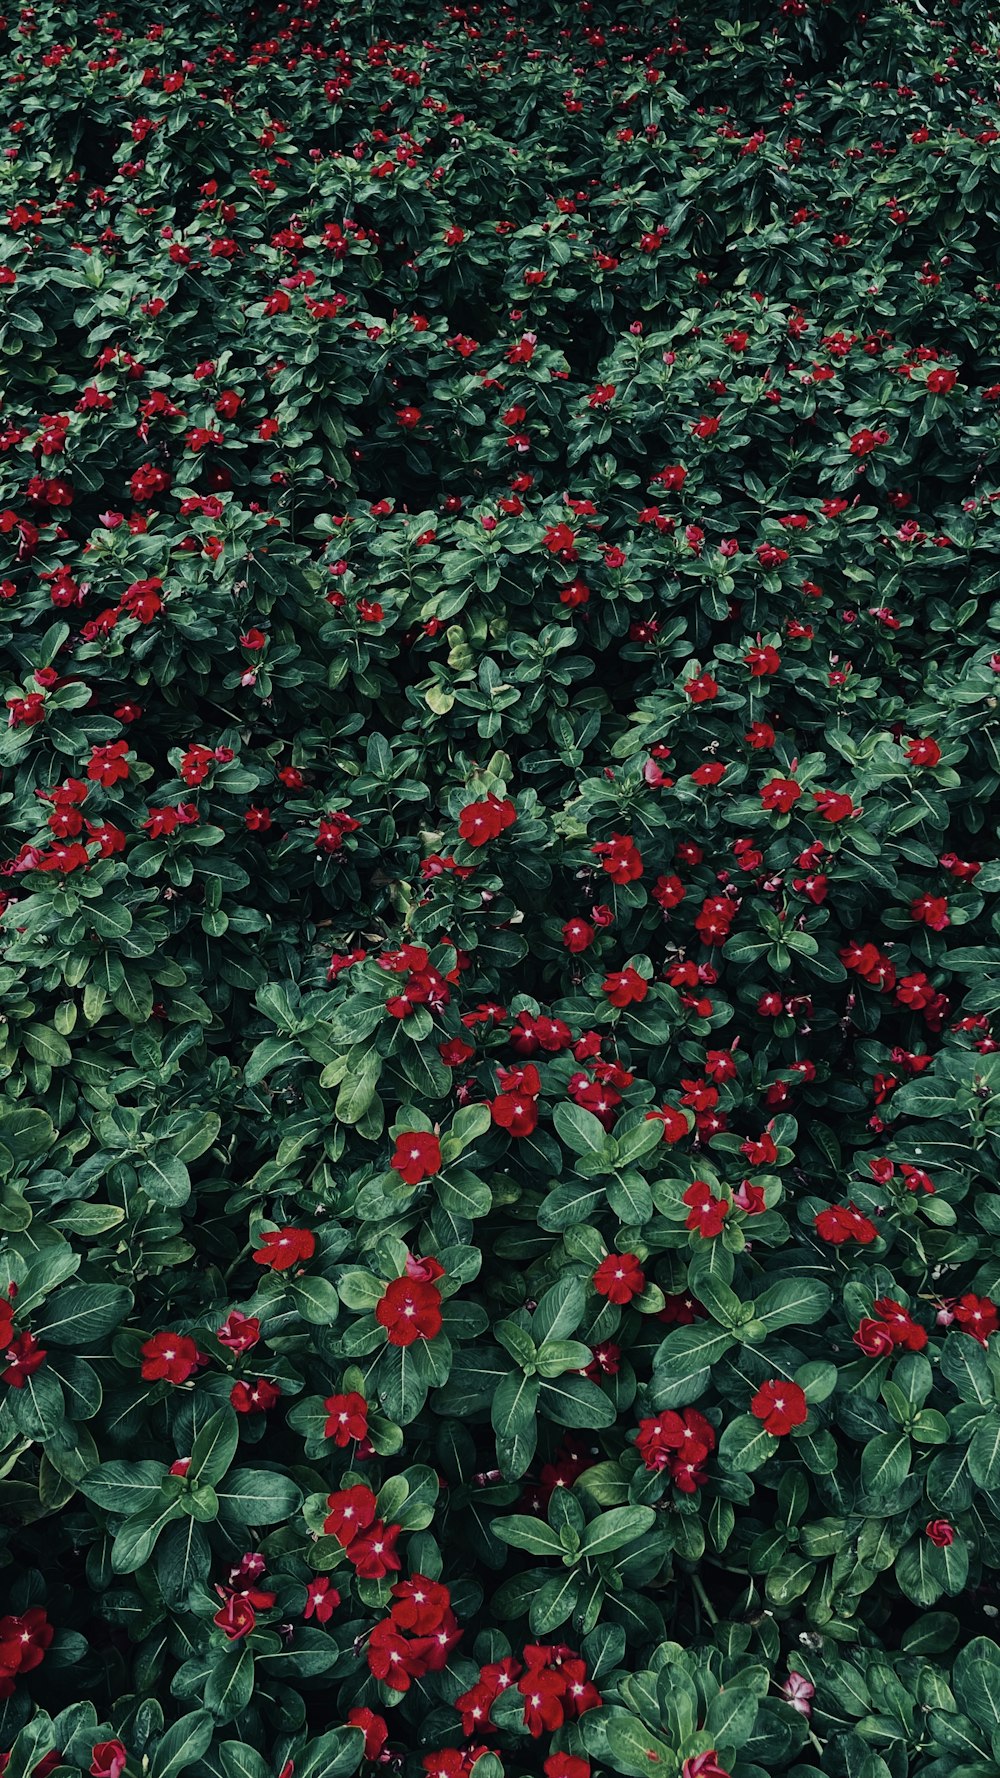 a field full of red berries and green leaves